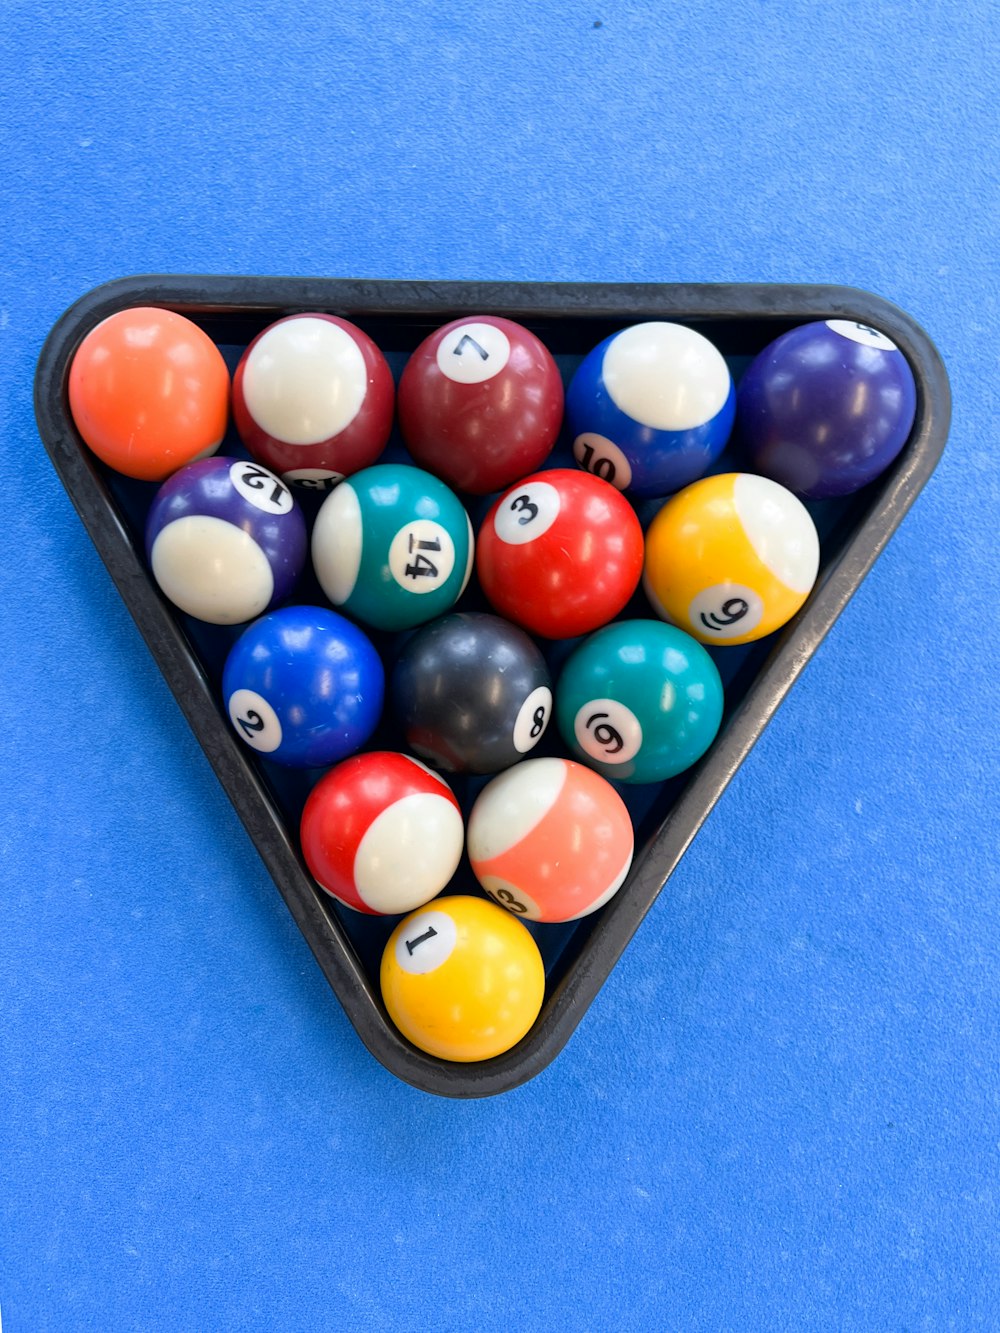 a triangle shaped pool table filled with pool balls